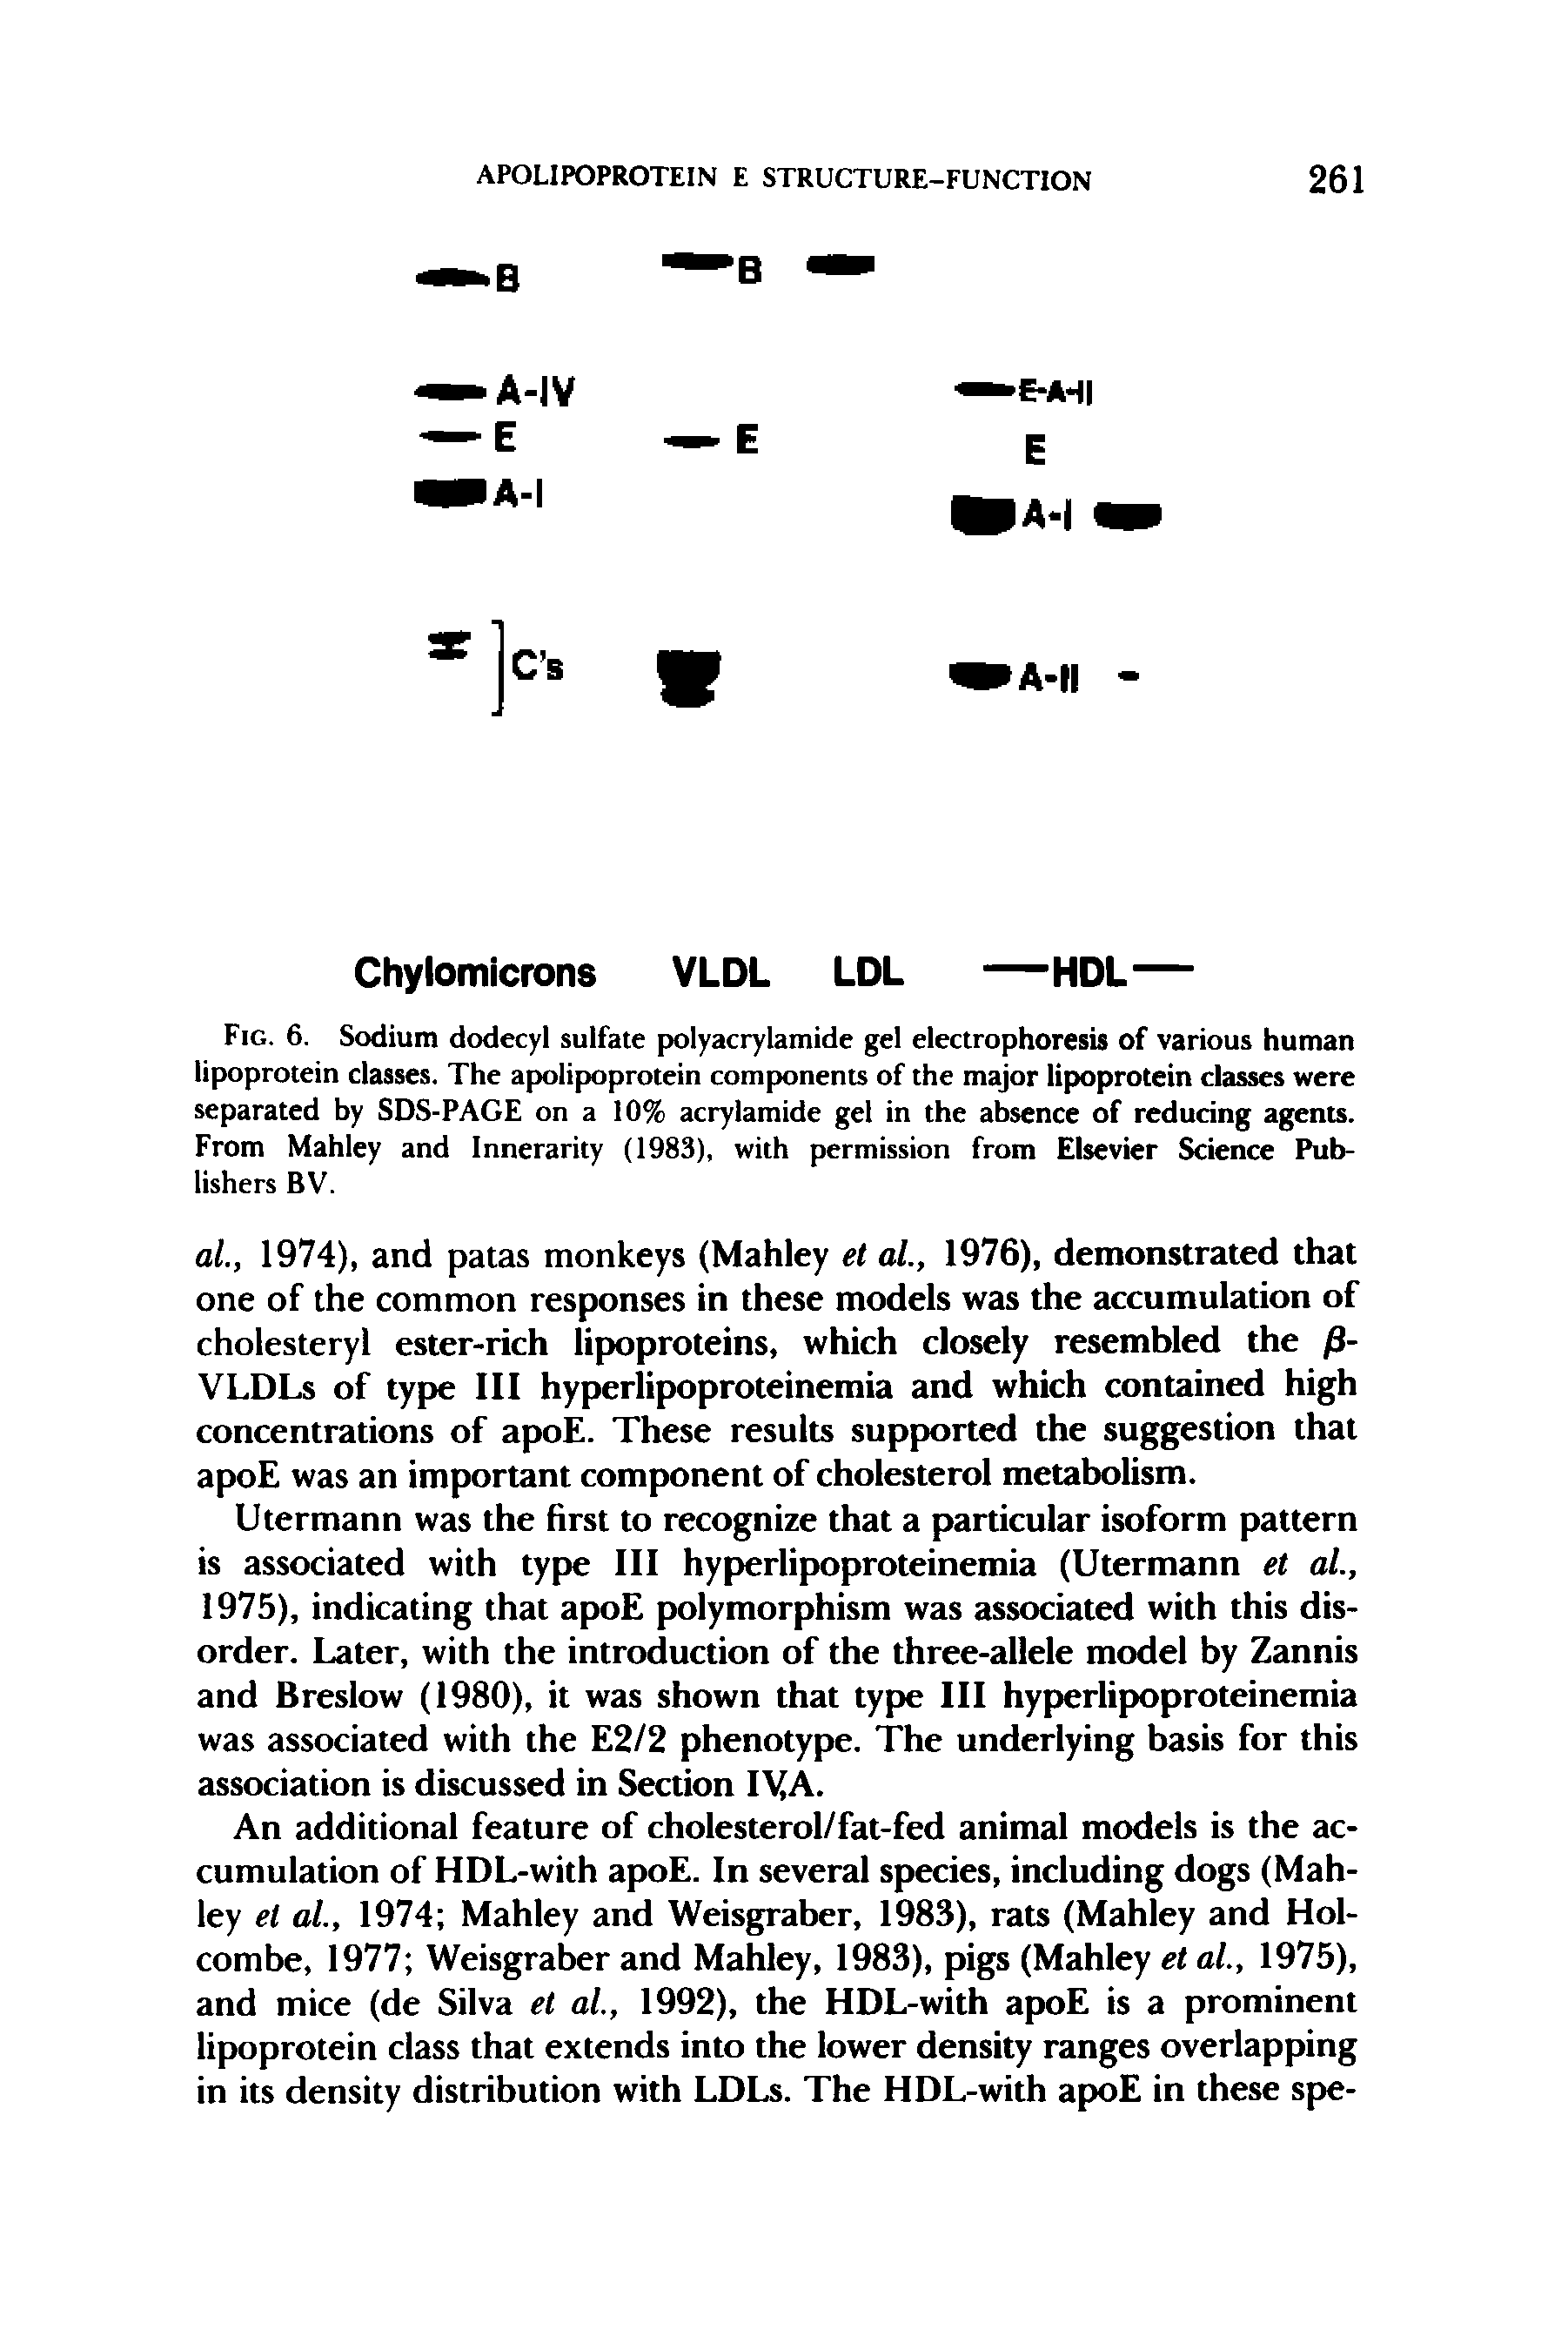 Fig. 6. Sodium dodecyl sulfate polyacrylamide gel electrophoresis of various human lipoprotein classes. The apolipoprotein components of the major lipoprotein classes were separated by SDS-PAGE on a 10% acrylamide gel in the absence of reducing agents. From Mahley and Innerarity (1983), with permission from Elsevier Science Publishers BV.